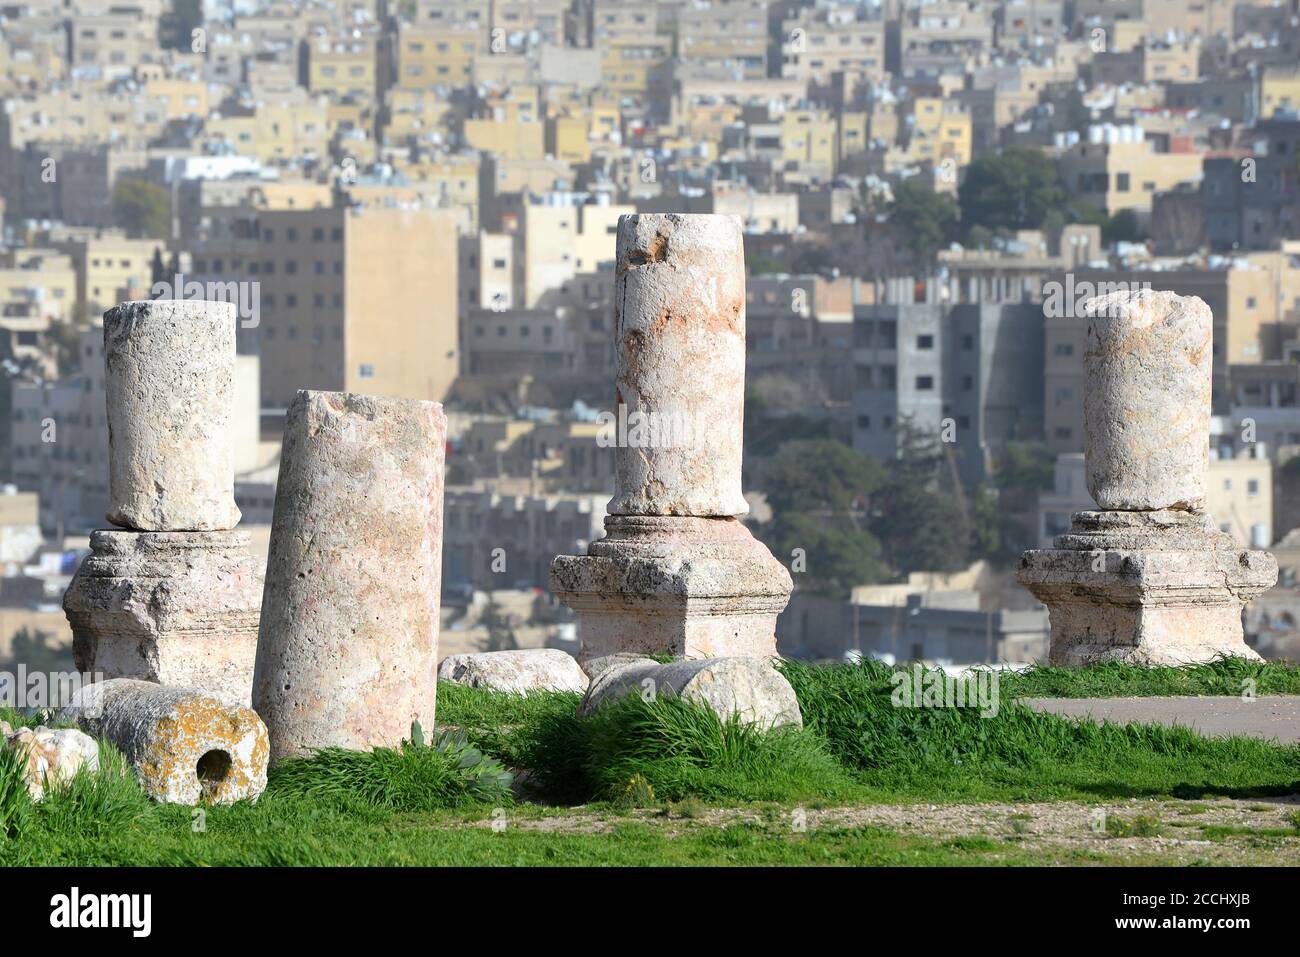 Ruins of Roman Corinthian columns in the Citadel in Amman, Jordan. Blurred and out of focus background showing Amman city skyline. Stock Photo